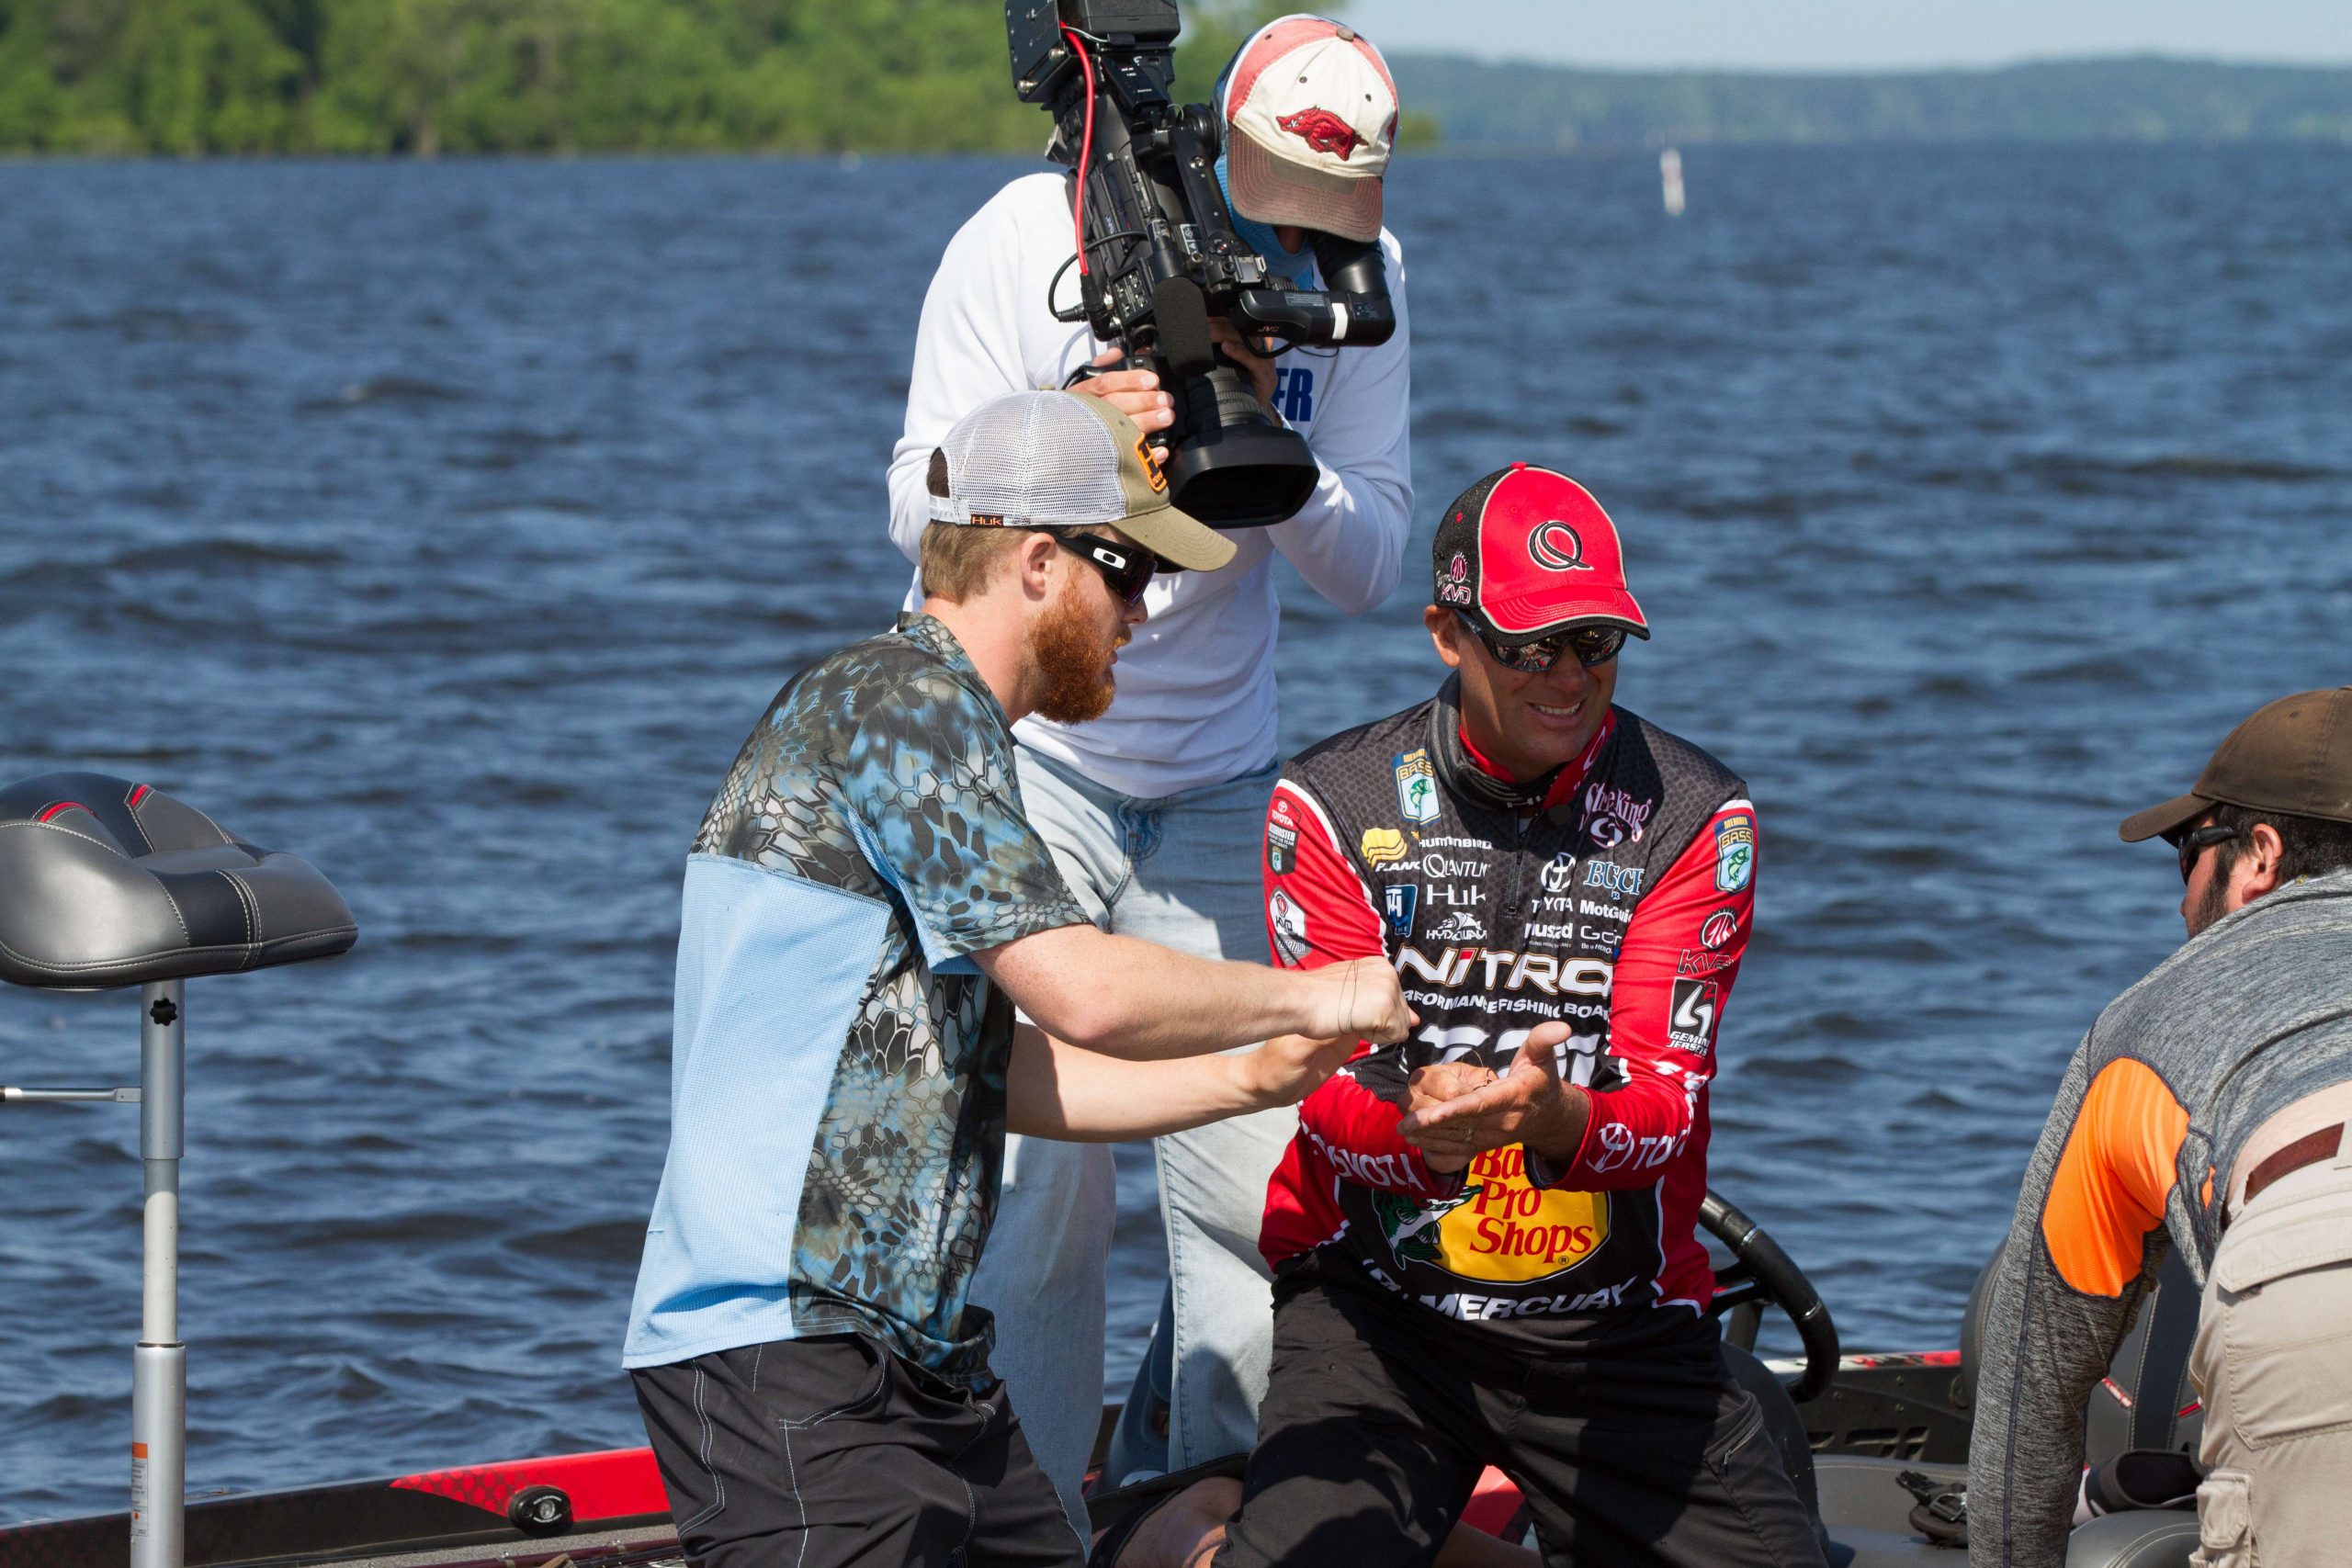 With such a sparkling resume through out his first 20 years on the Bassmaster circuit, many fans had high expectations for Kevin VanDam. Then he went five years without a win. The longest in his B.A.S.S. carreer. In May of 2016, KVD went wire-to-wire on Toledo Bend, weighing in a winning 96 pounds, 2 ounces. The biggest bag of his career landed him his record 21st B.A.S.S. victory.
